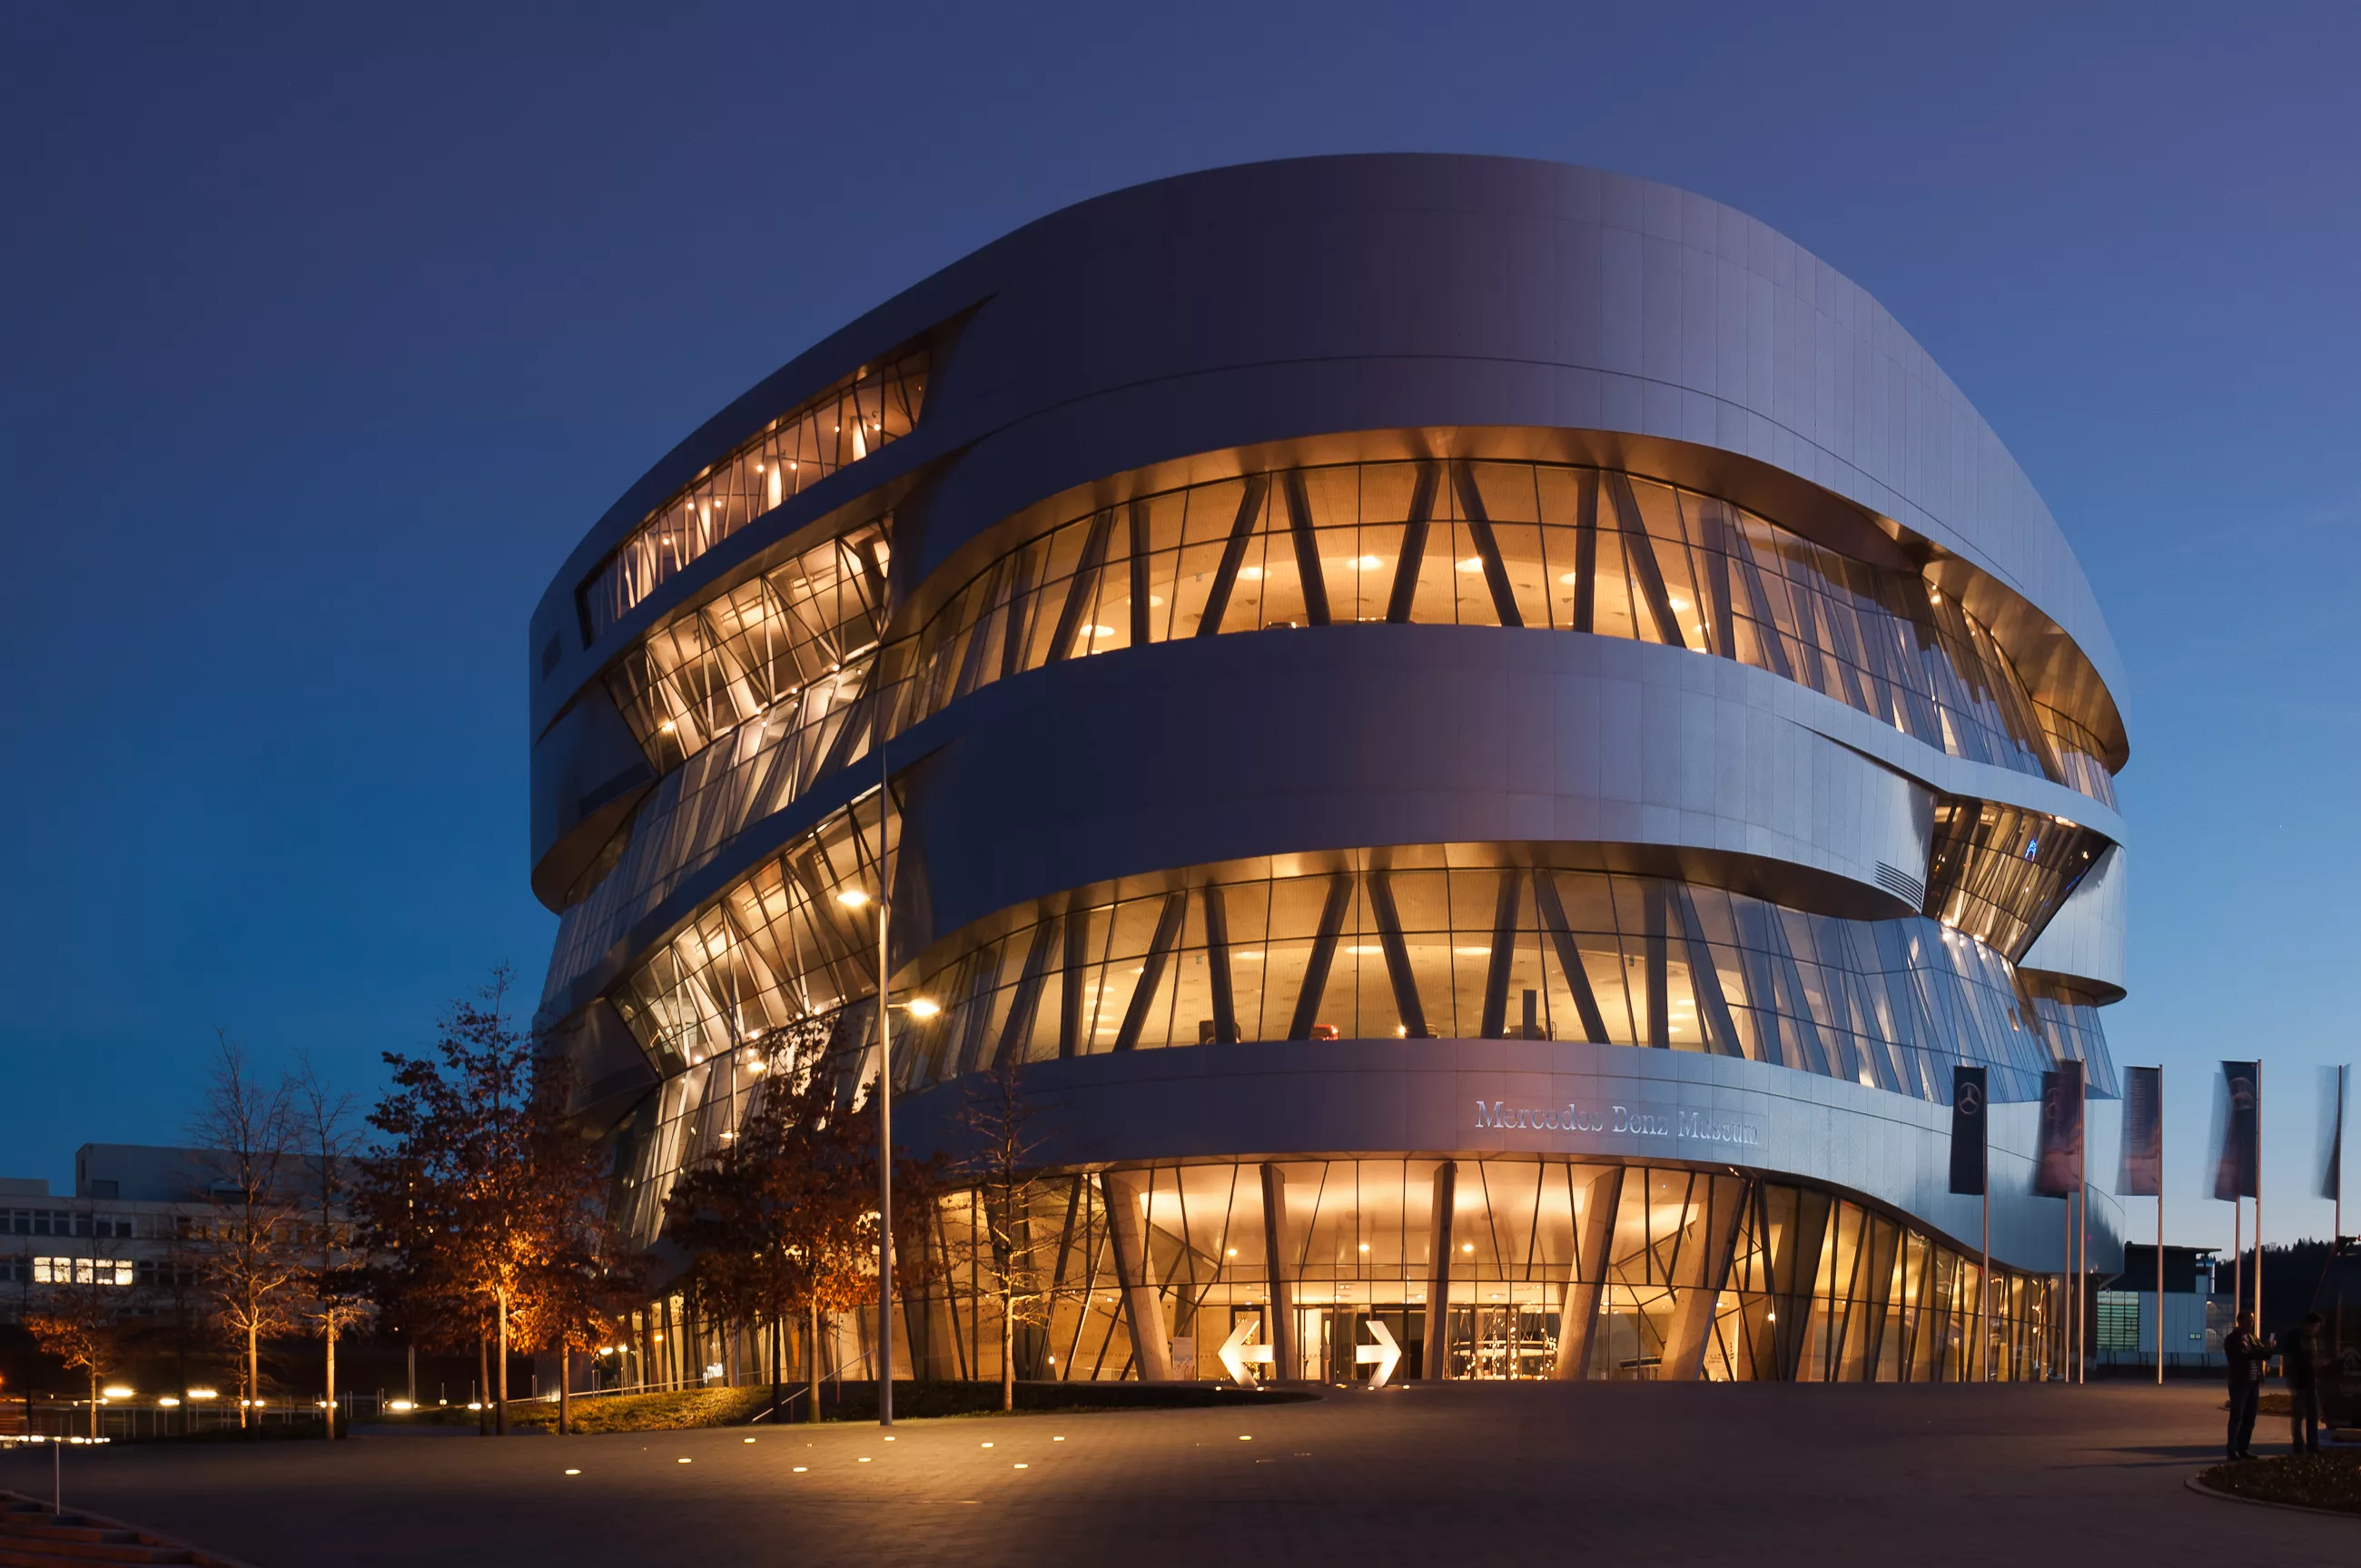 Museum Mercedes-Benz in Germany, Europe | Museums - Rated 4.6